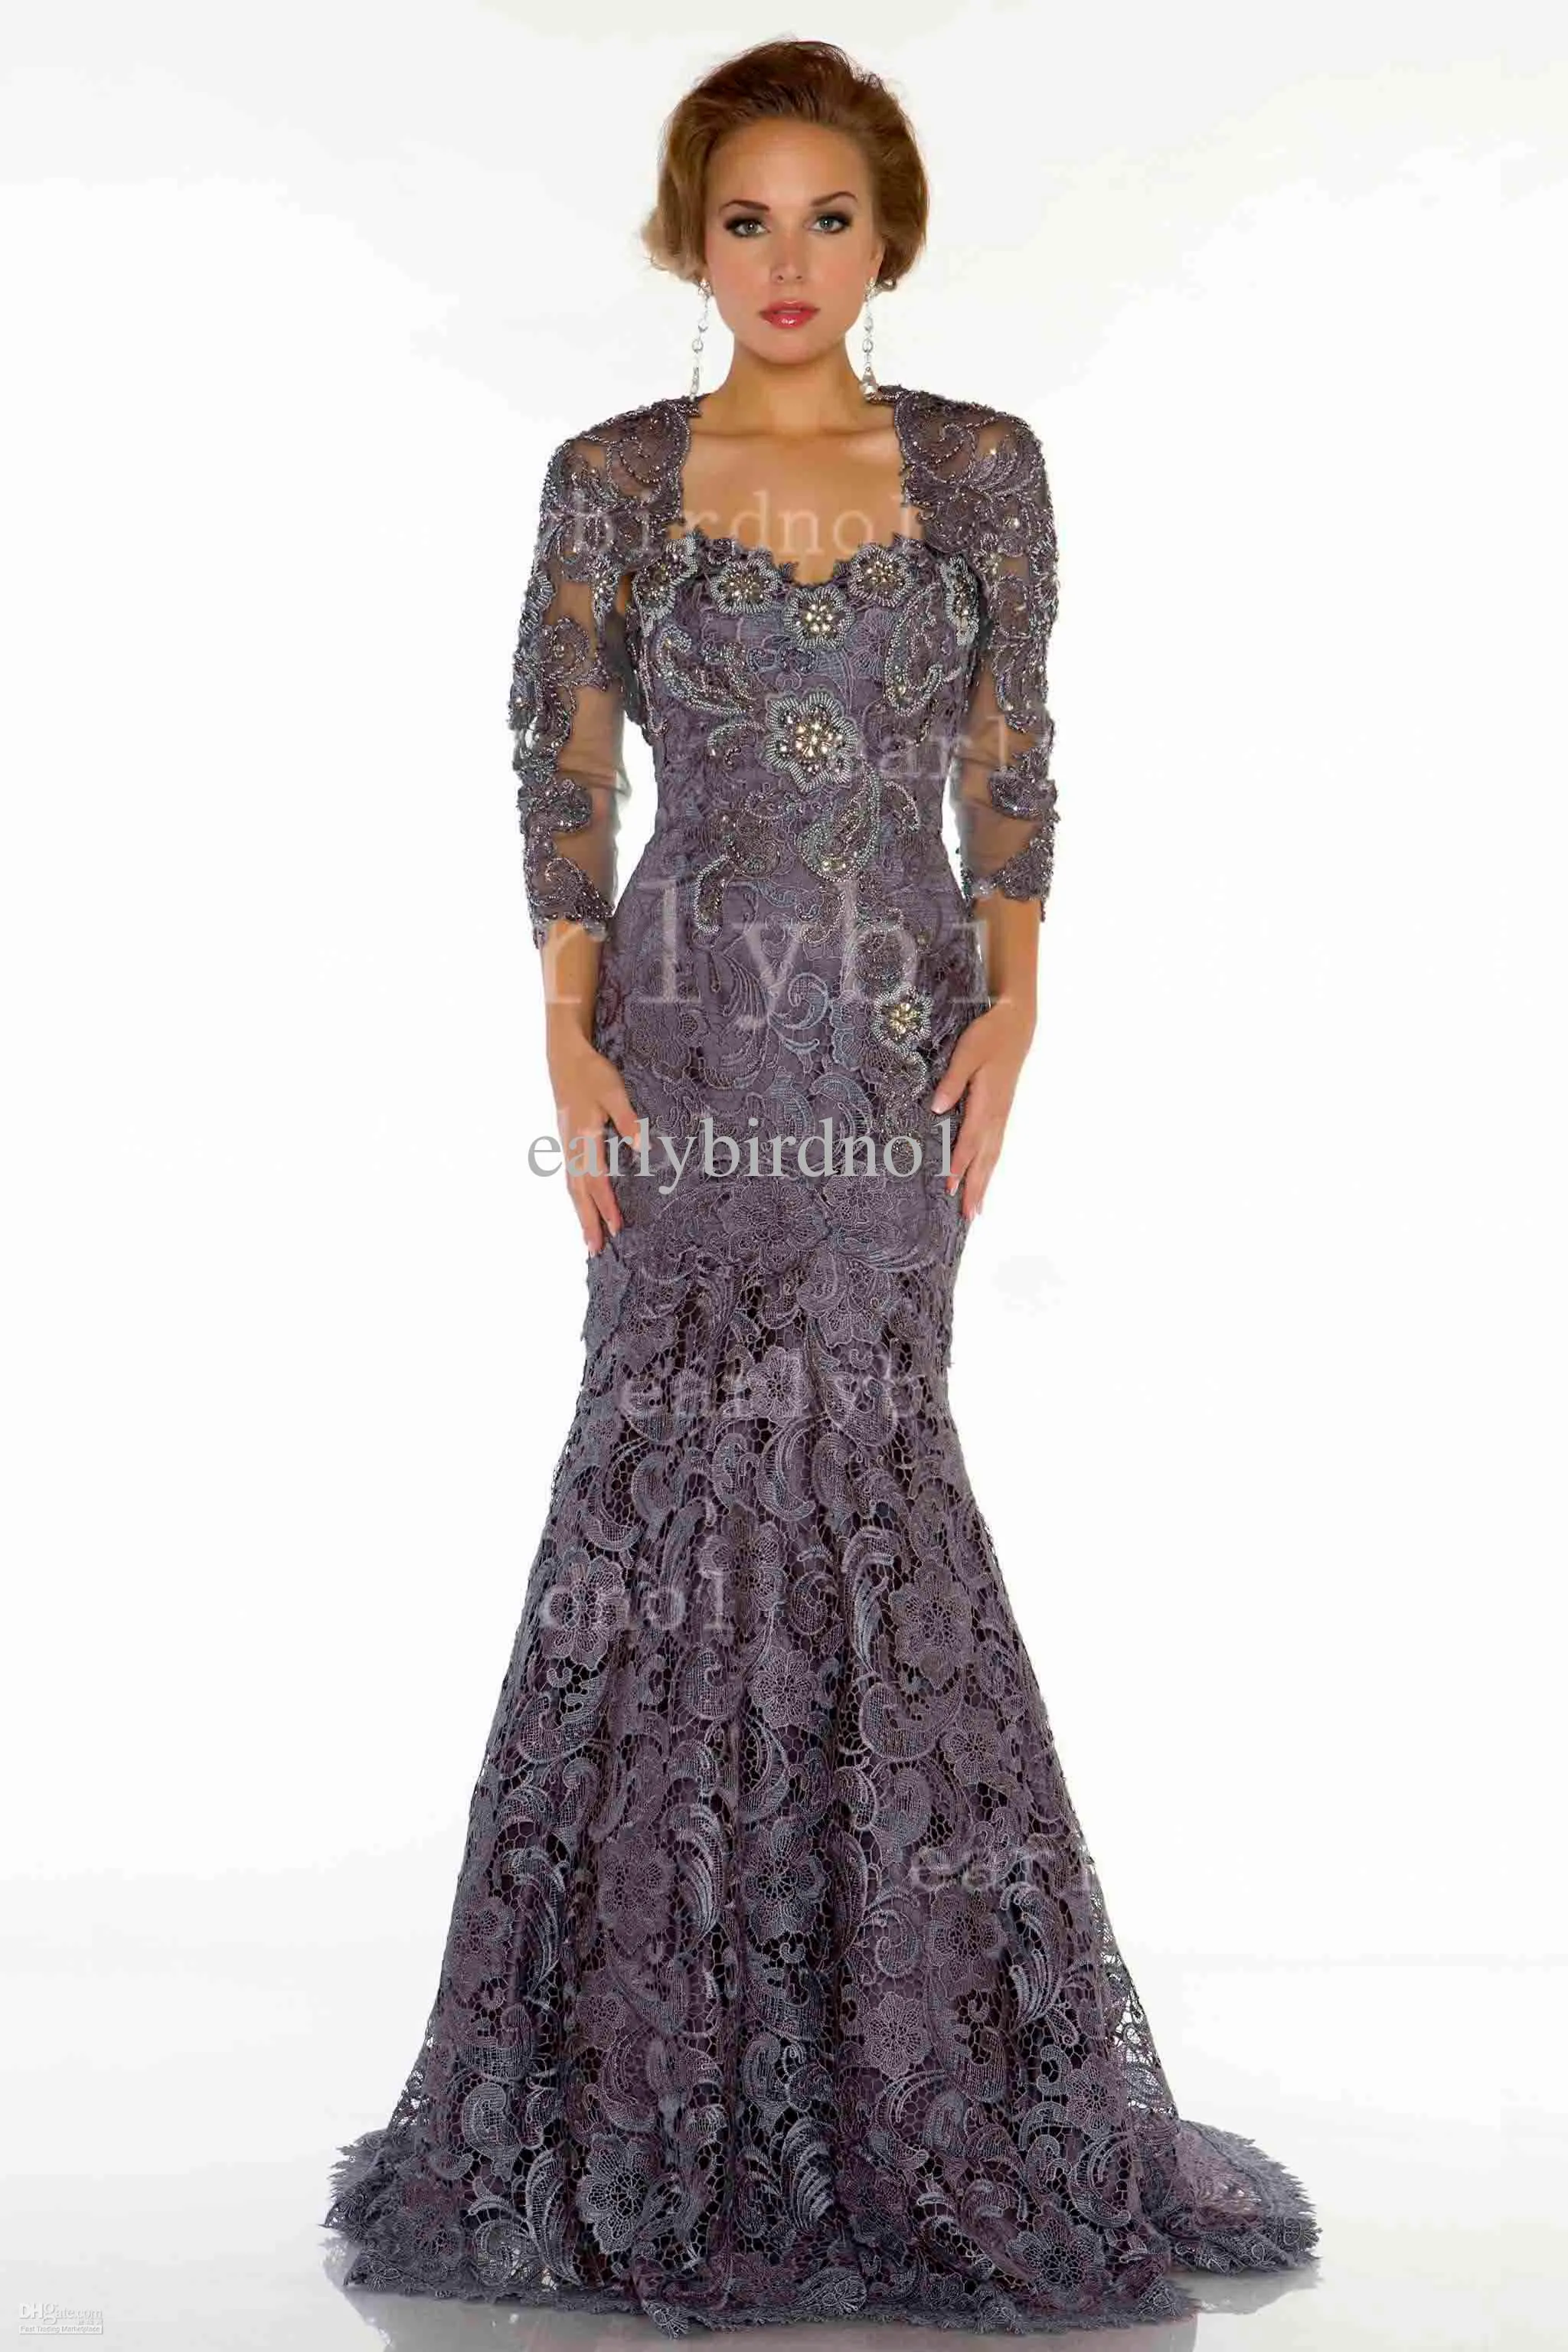 New Plus Size Navy Blue Satin Lace Knee length Sheath Scoop Mother of the Bride Dresses With 3/4 Sleeves Jacket Evening Gowns